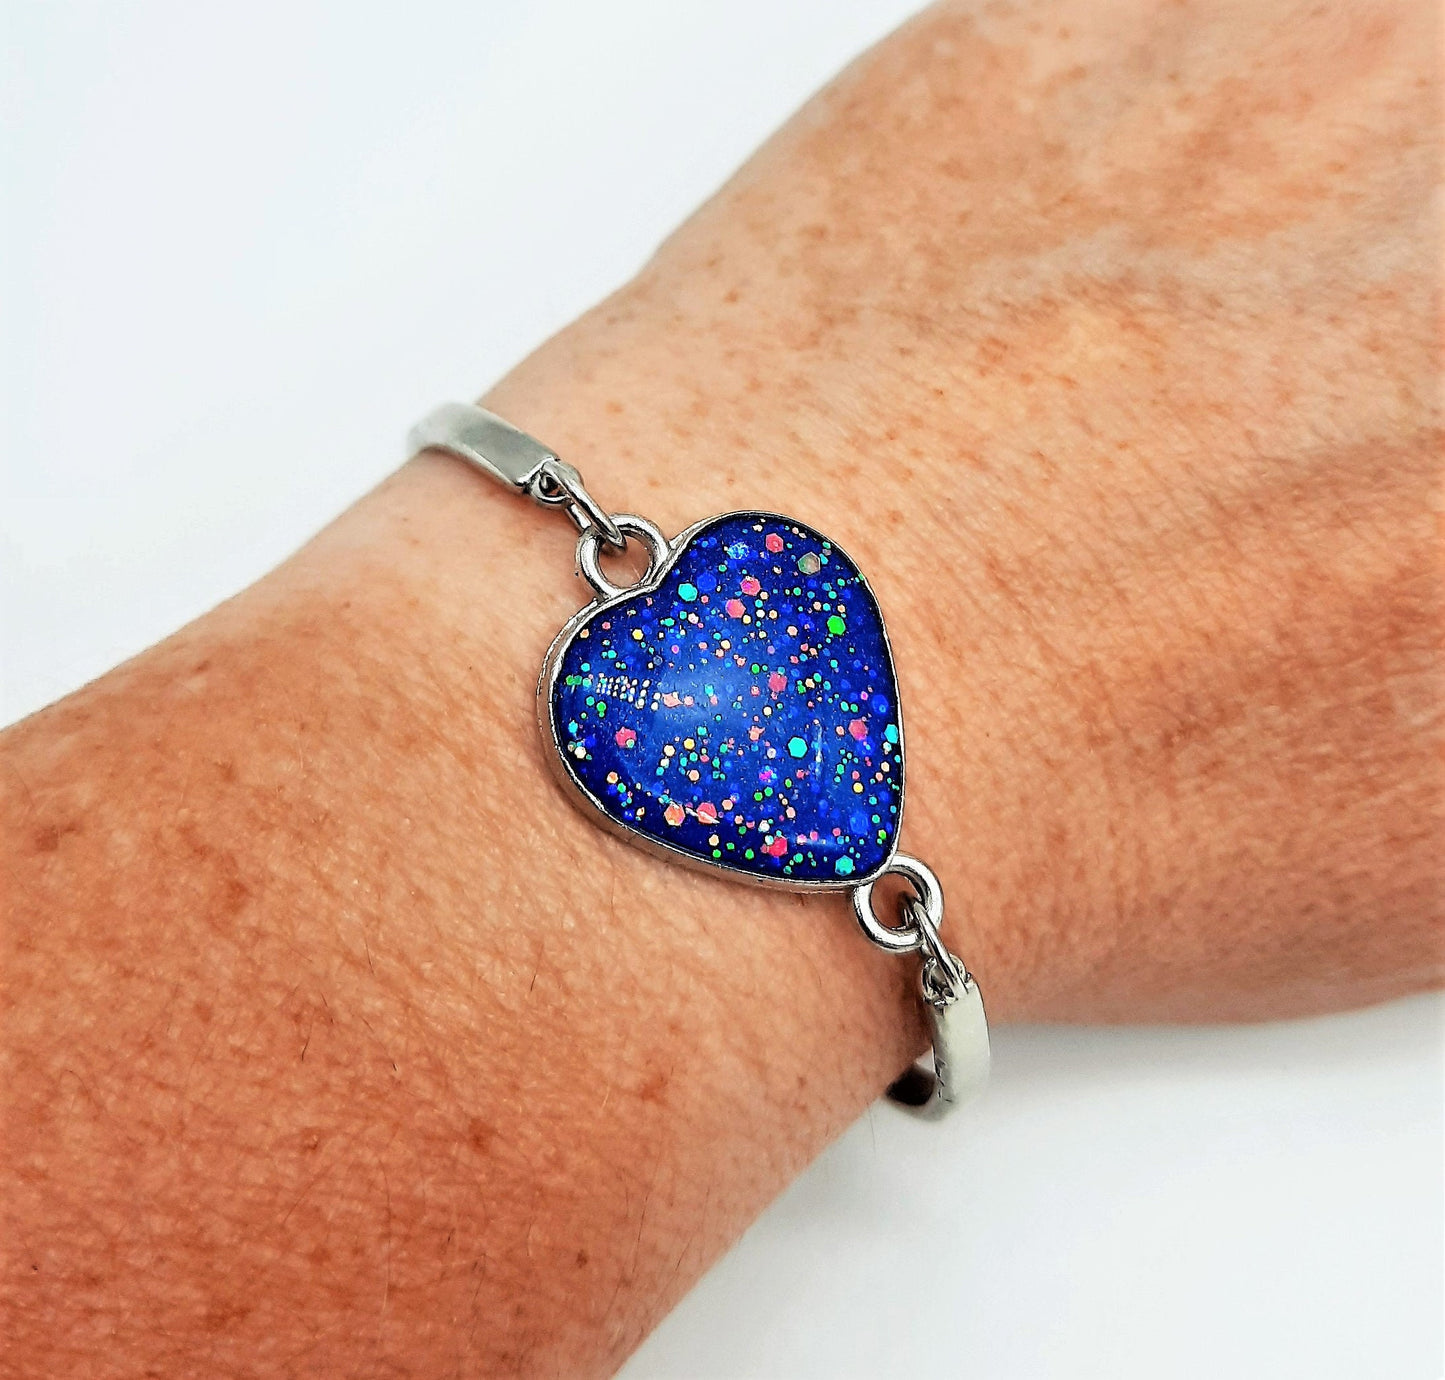 Handcrafted Iridescent Blue Heart Adjustable Bangle Bracelet-Made with Resin, Glitter, & Holographic Powder-Hypoallergenic Stainless Steel